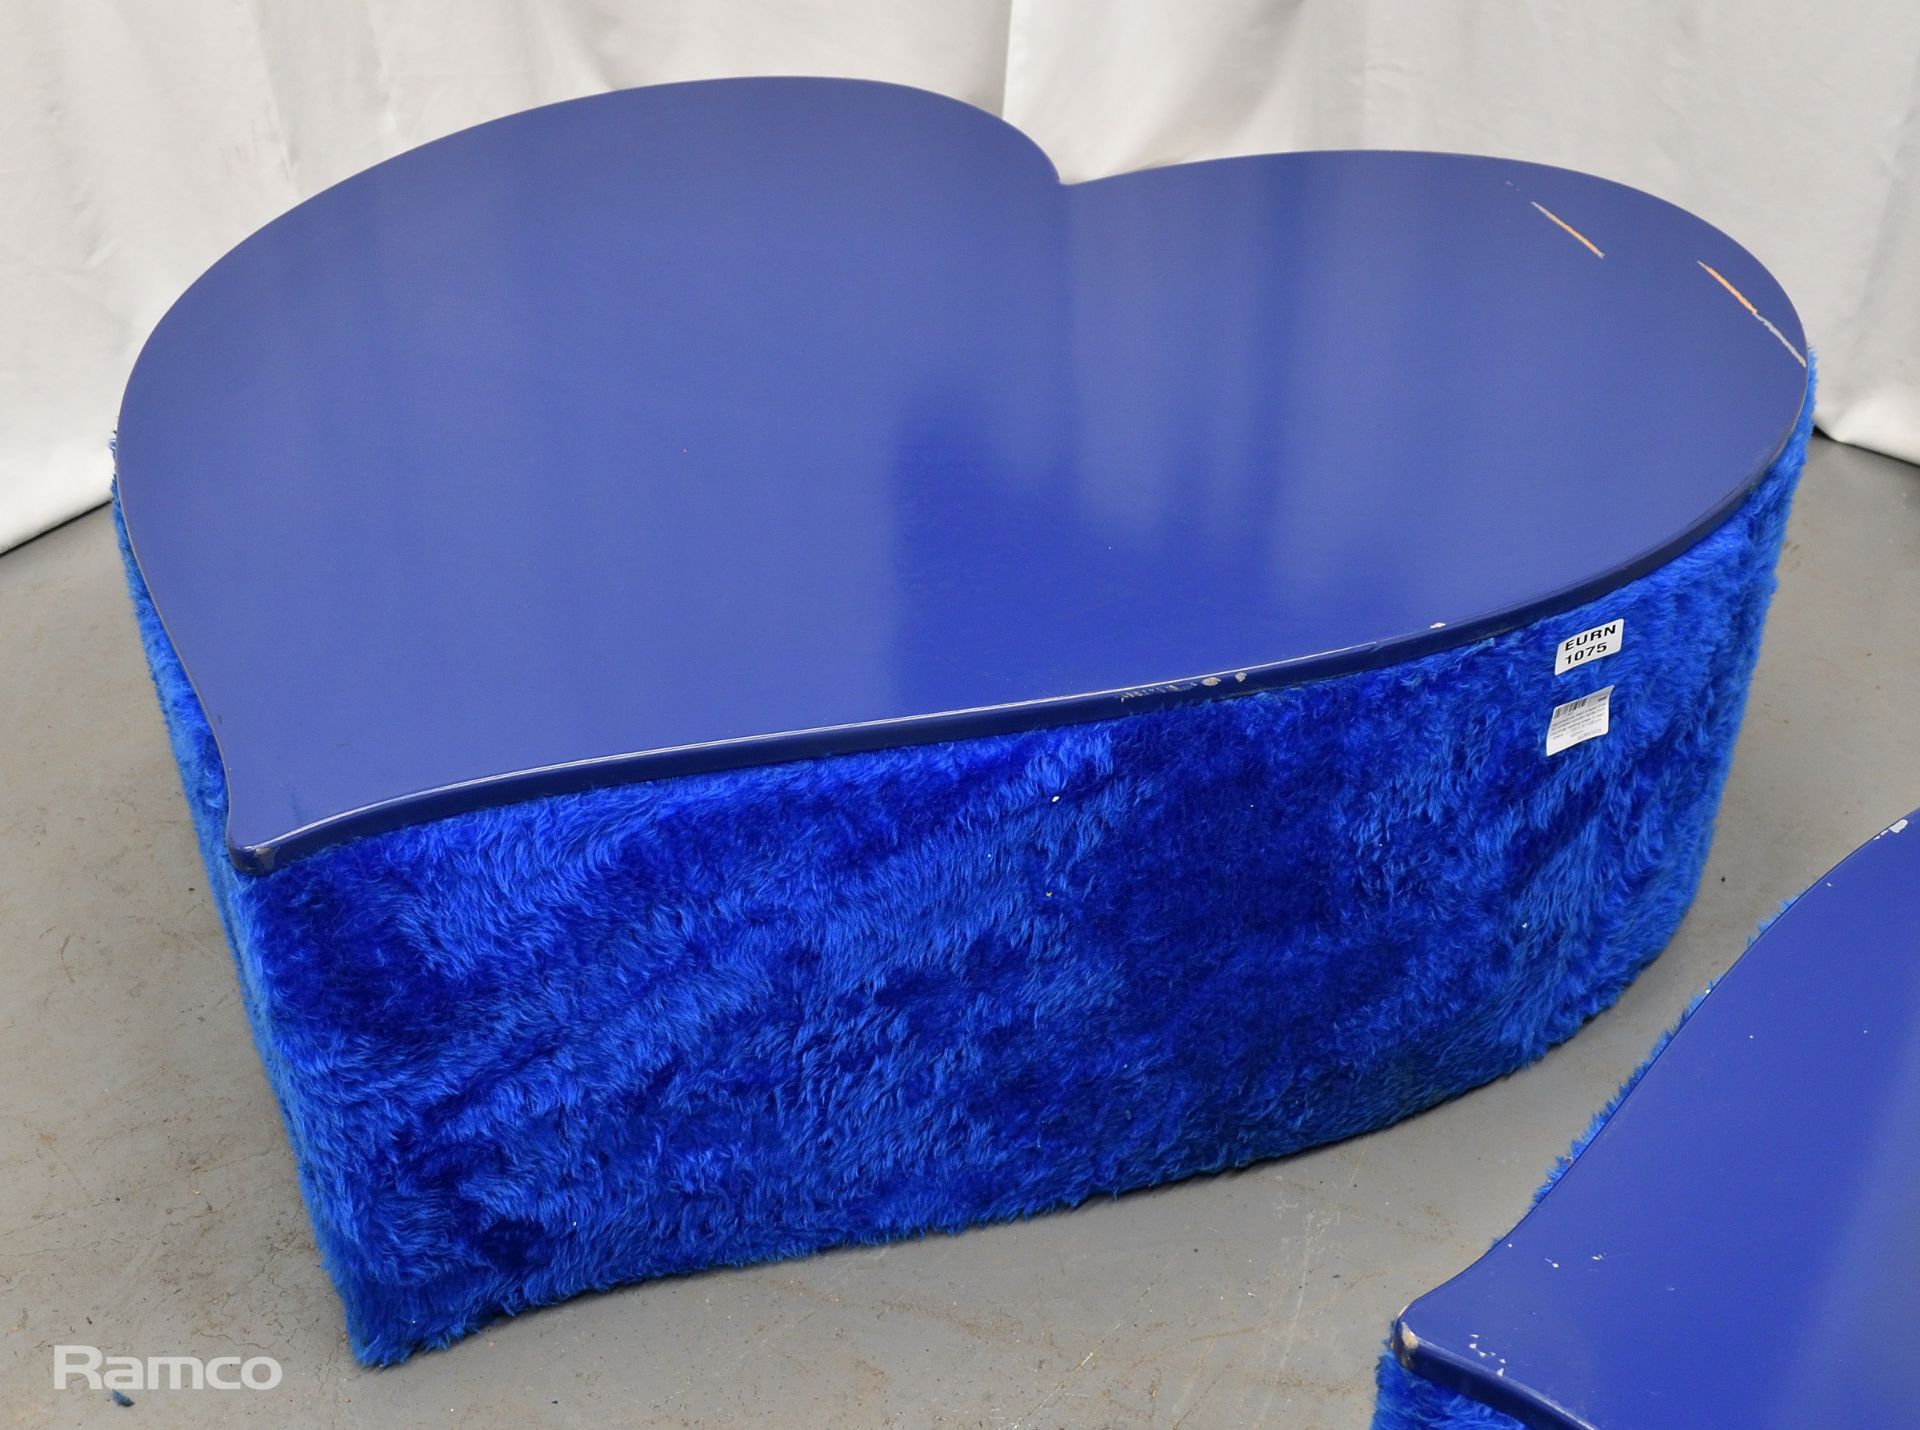 3x Asymmetrical heart shaped blue fur-covered wooden tables from countries' seating area - Image 13 of 14